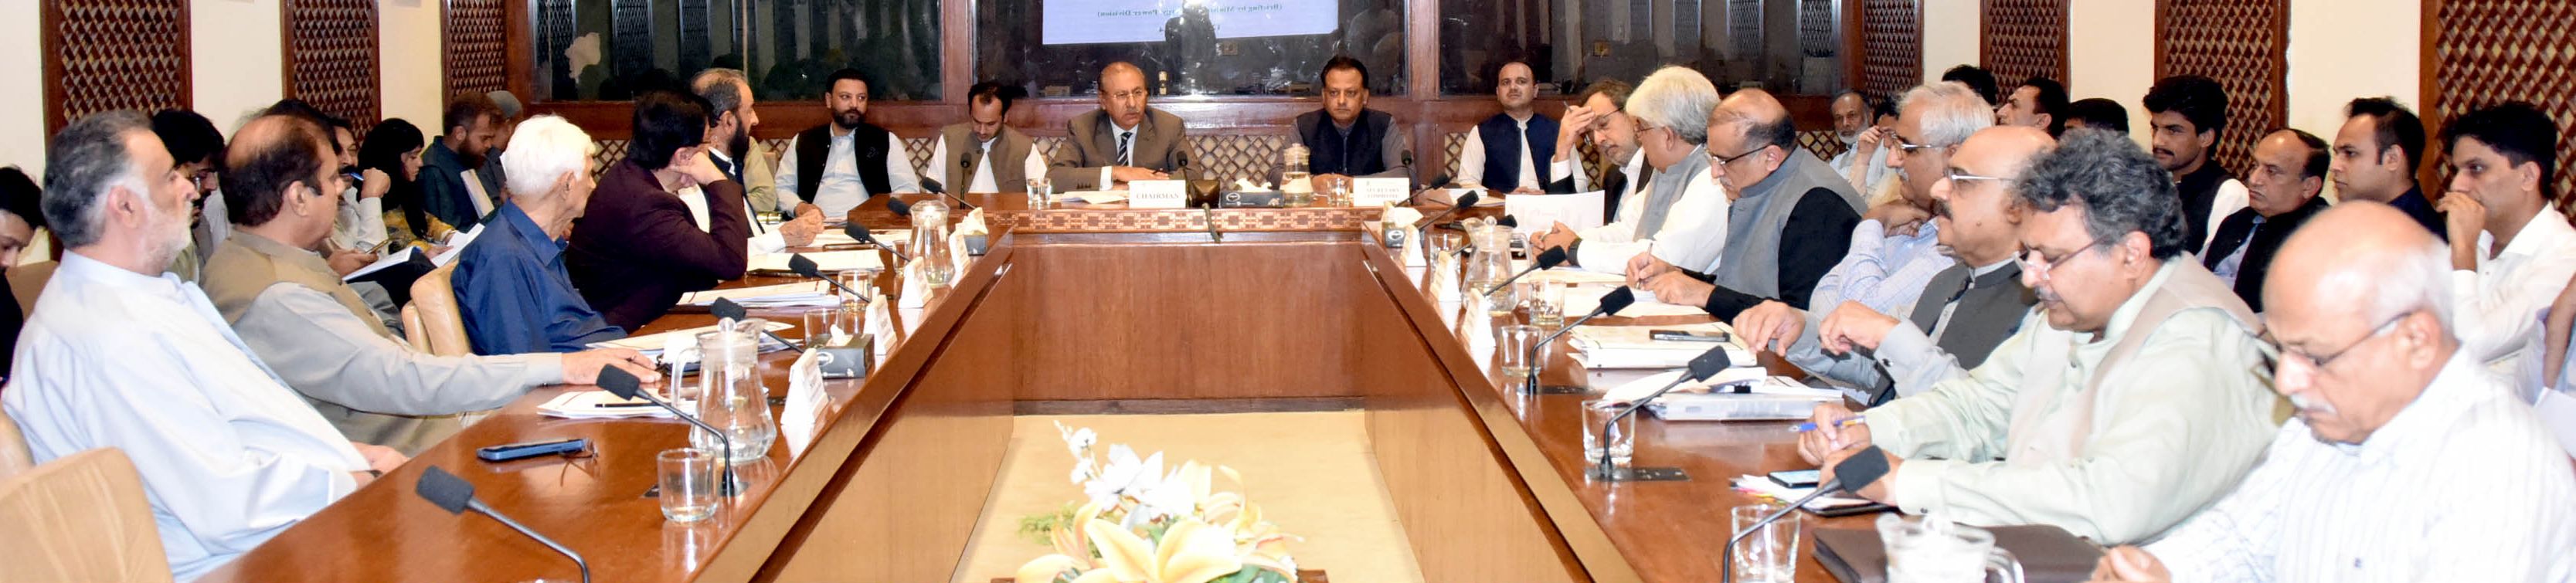 Senator Mohsin Aziz, Chairman Senate Standing Committee on Power presiding over a Meeting of The Committee at Parliament House Islamabad